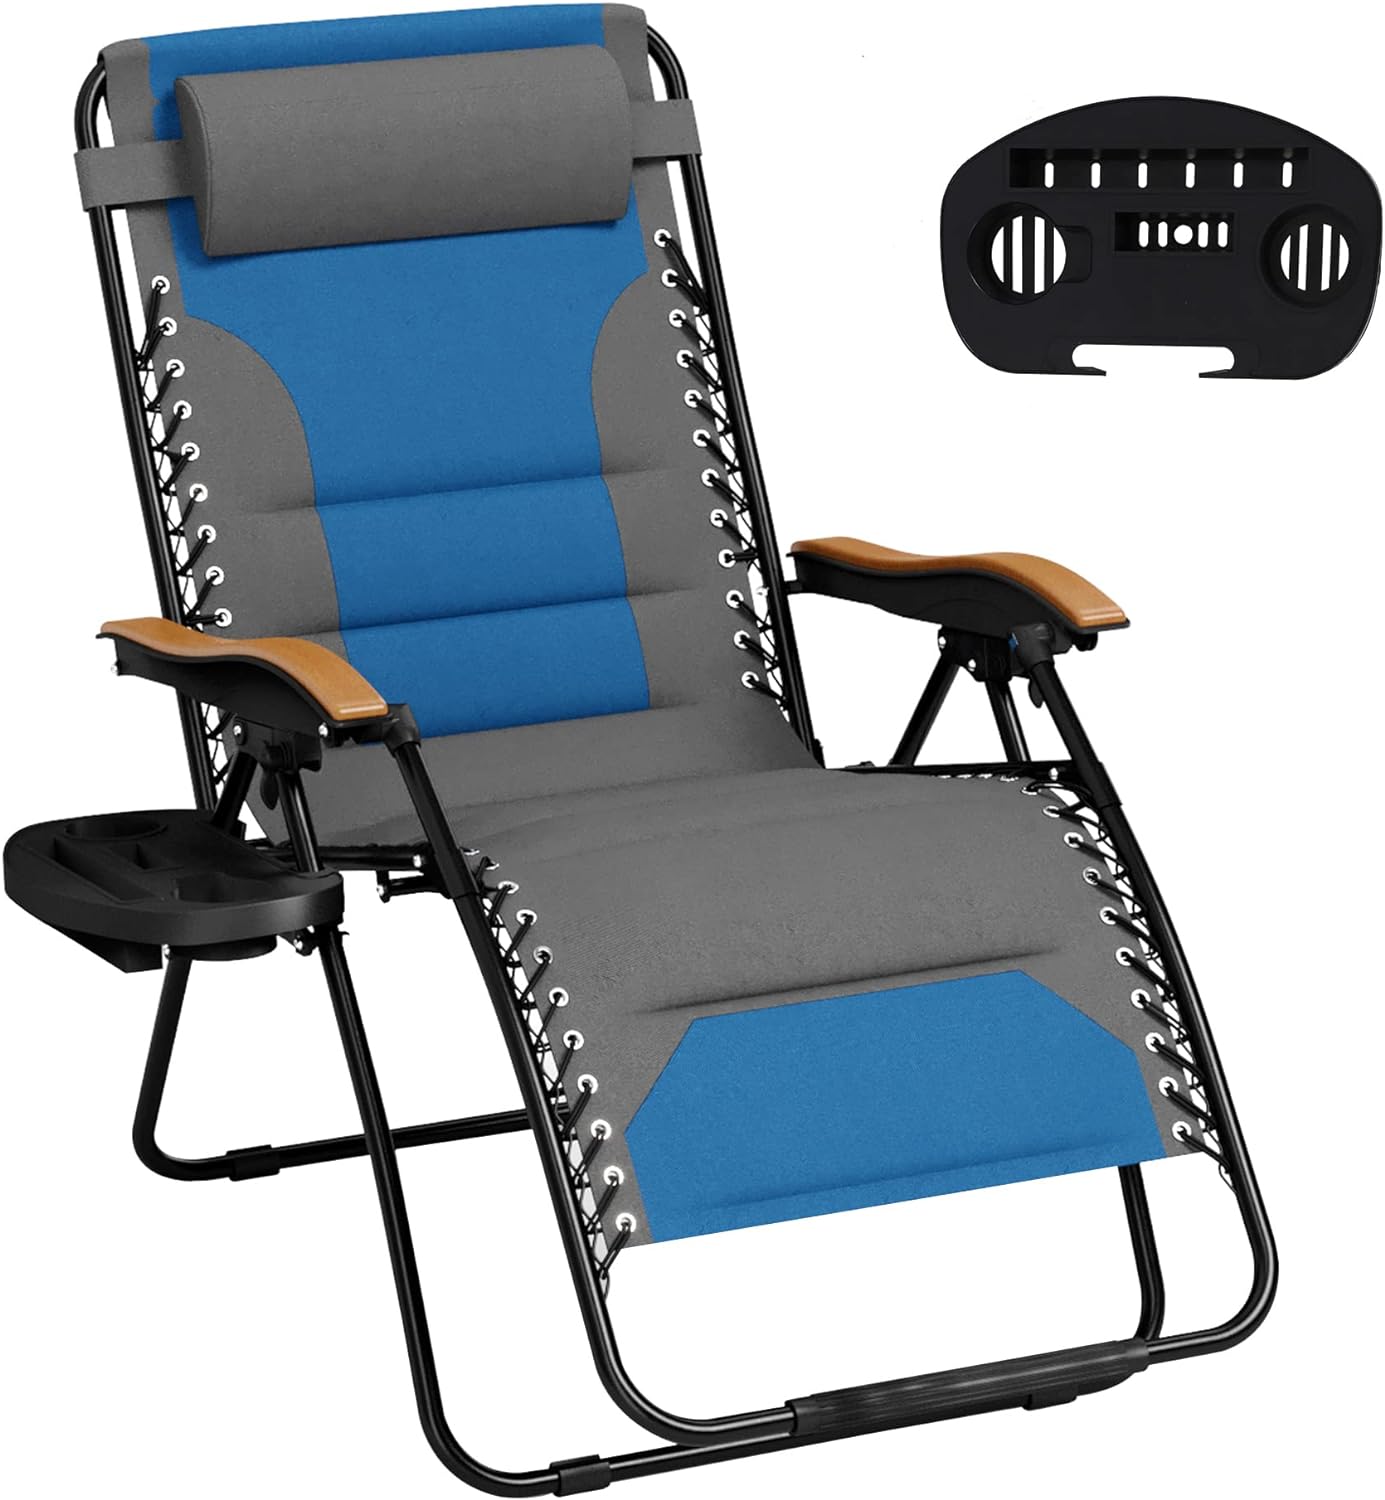 MFSTUDIO Zero Gravity Chairs, Oversized Patio Recliner Chair, Padded Folding Lawn Chair with Cup Holder Tray, Support 400lbs, Grey Blue